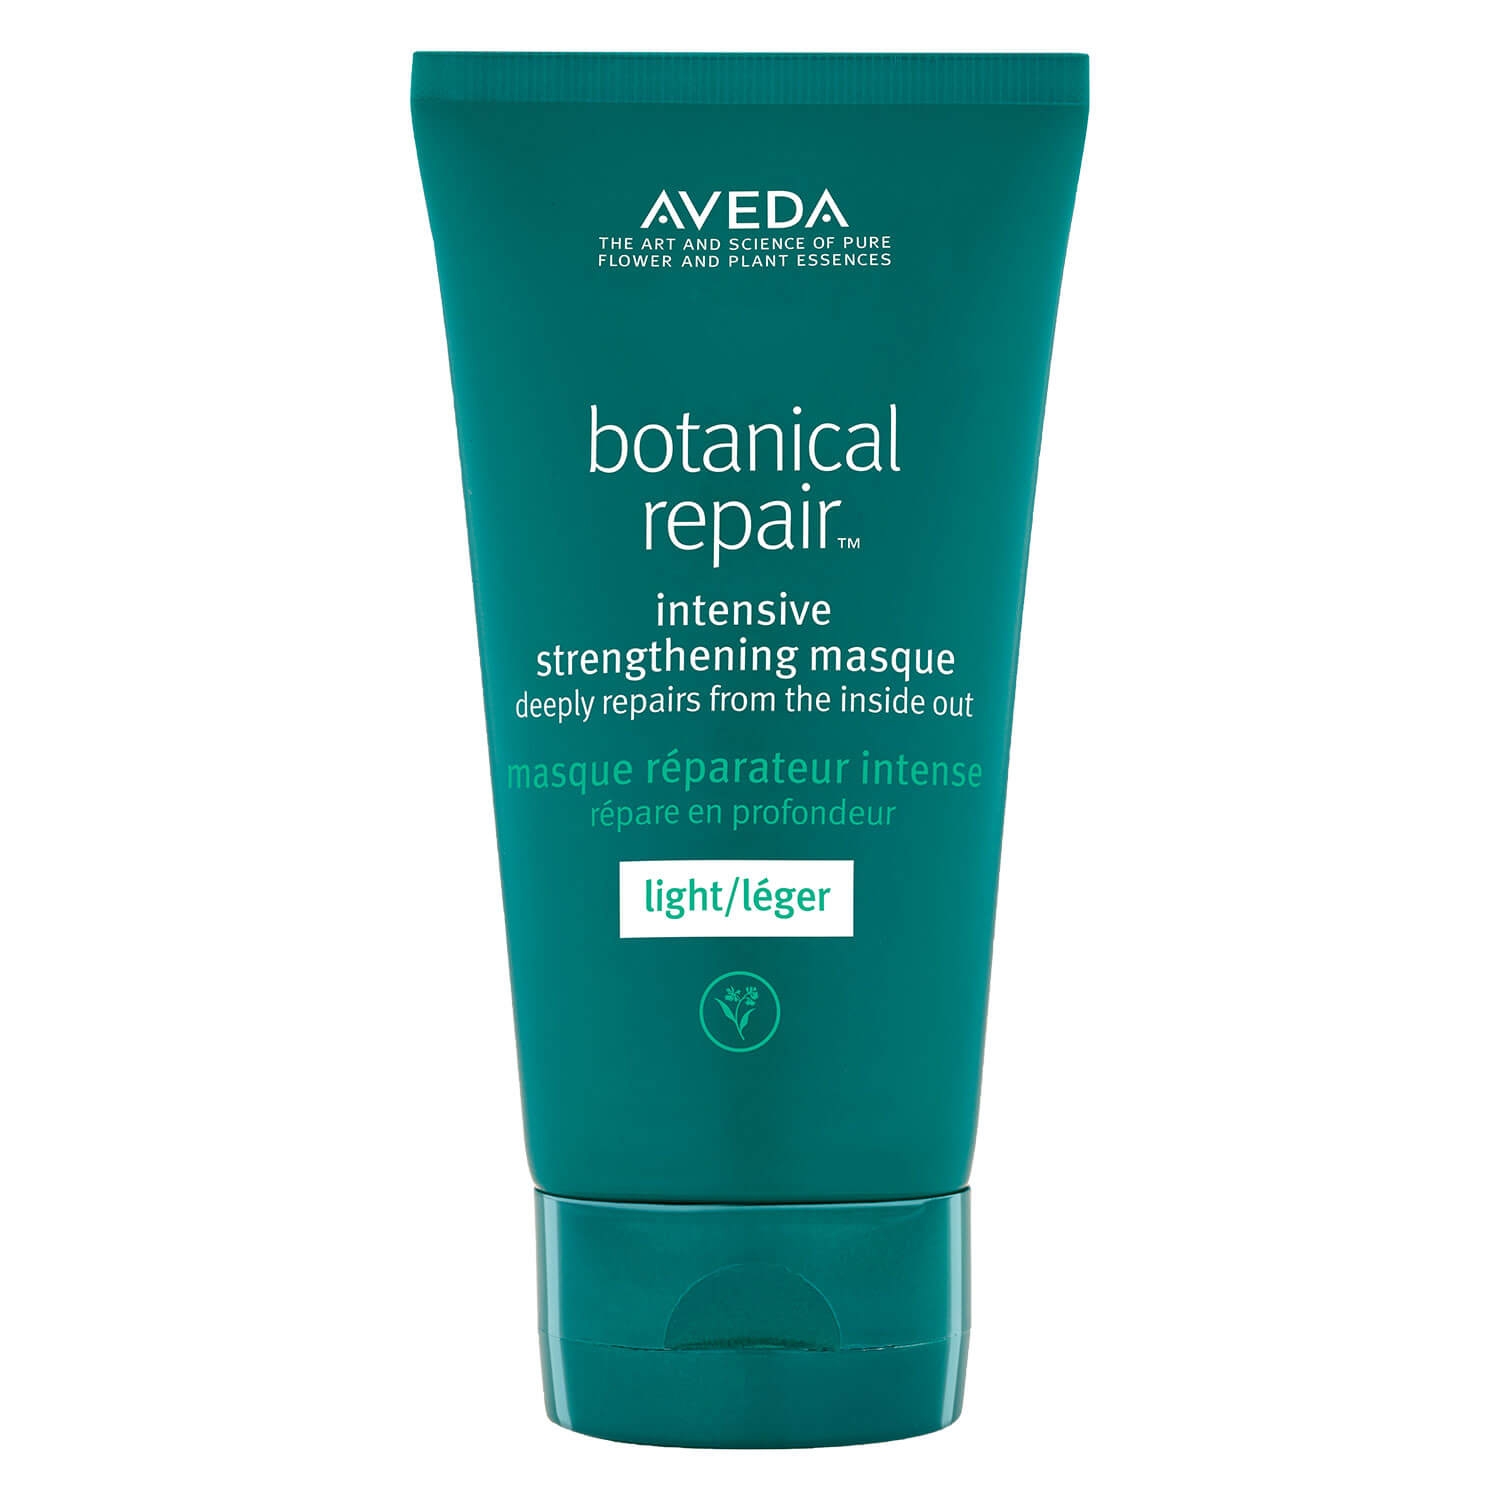 Product image from botanical repair - intensive strengthening masque light